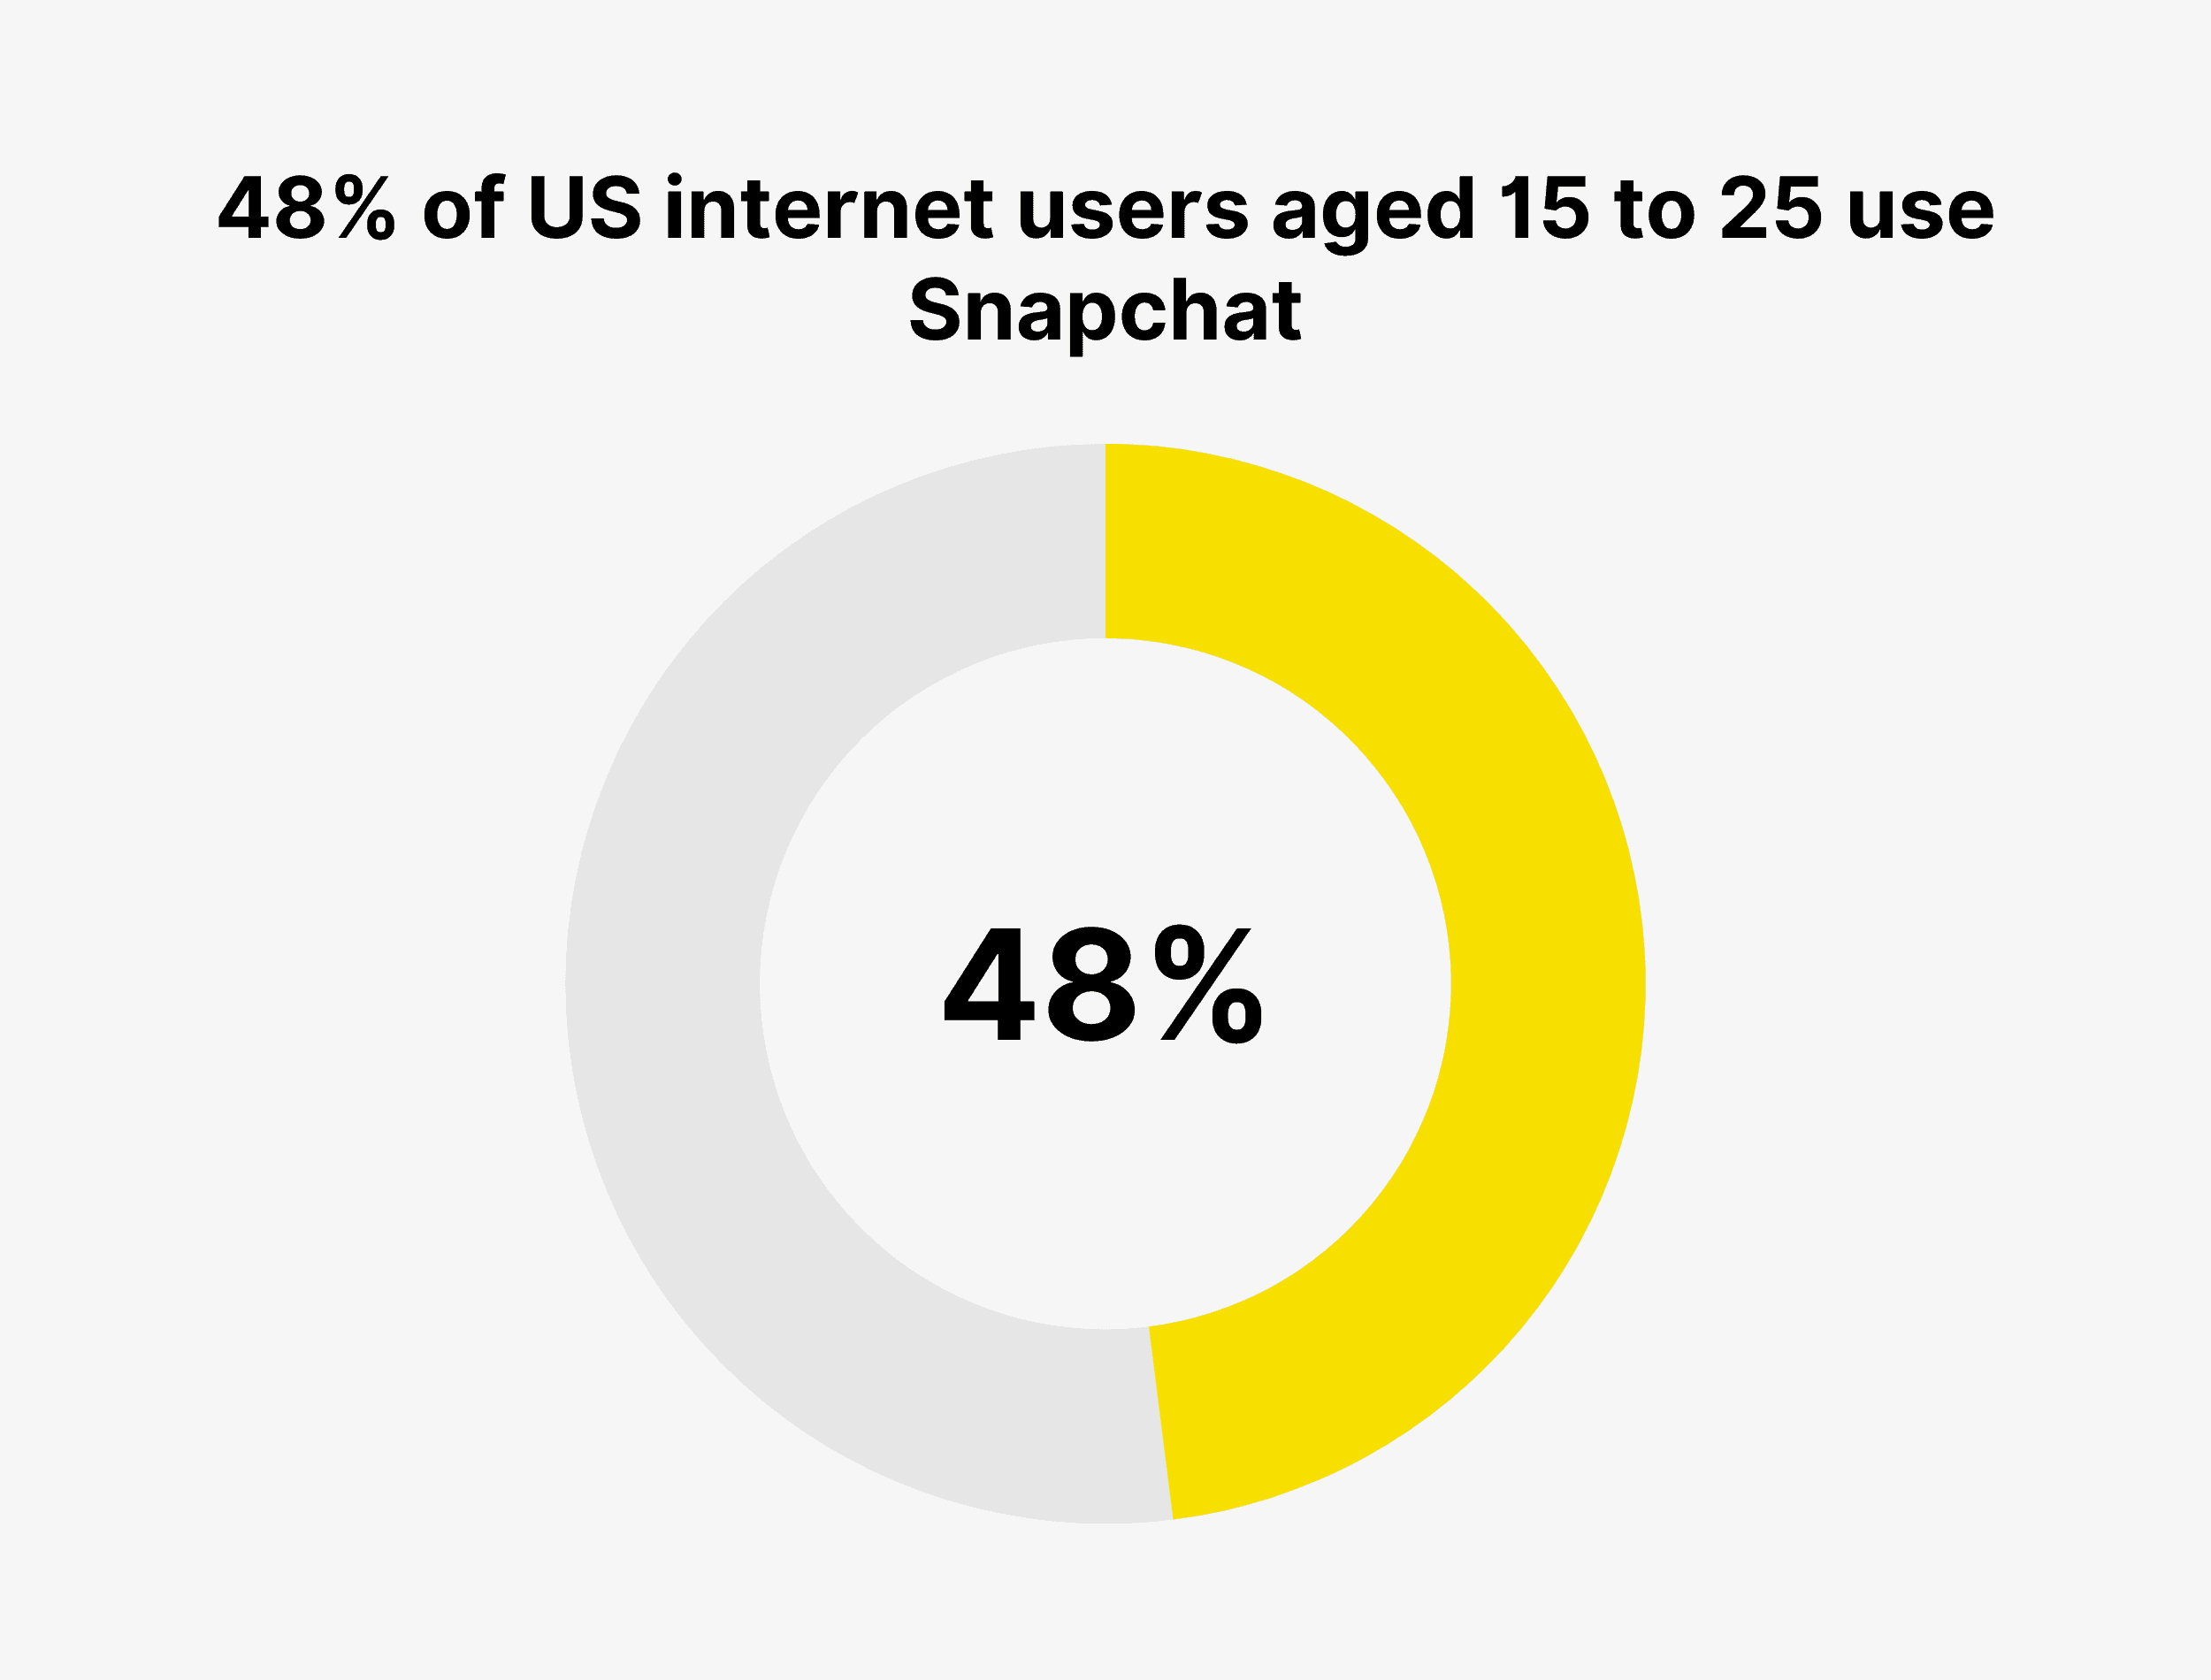 48% of US internet users aged 15 to 25 use Snapchat